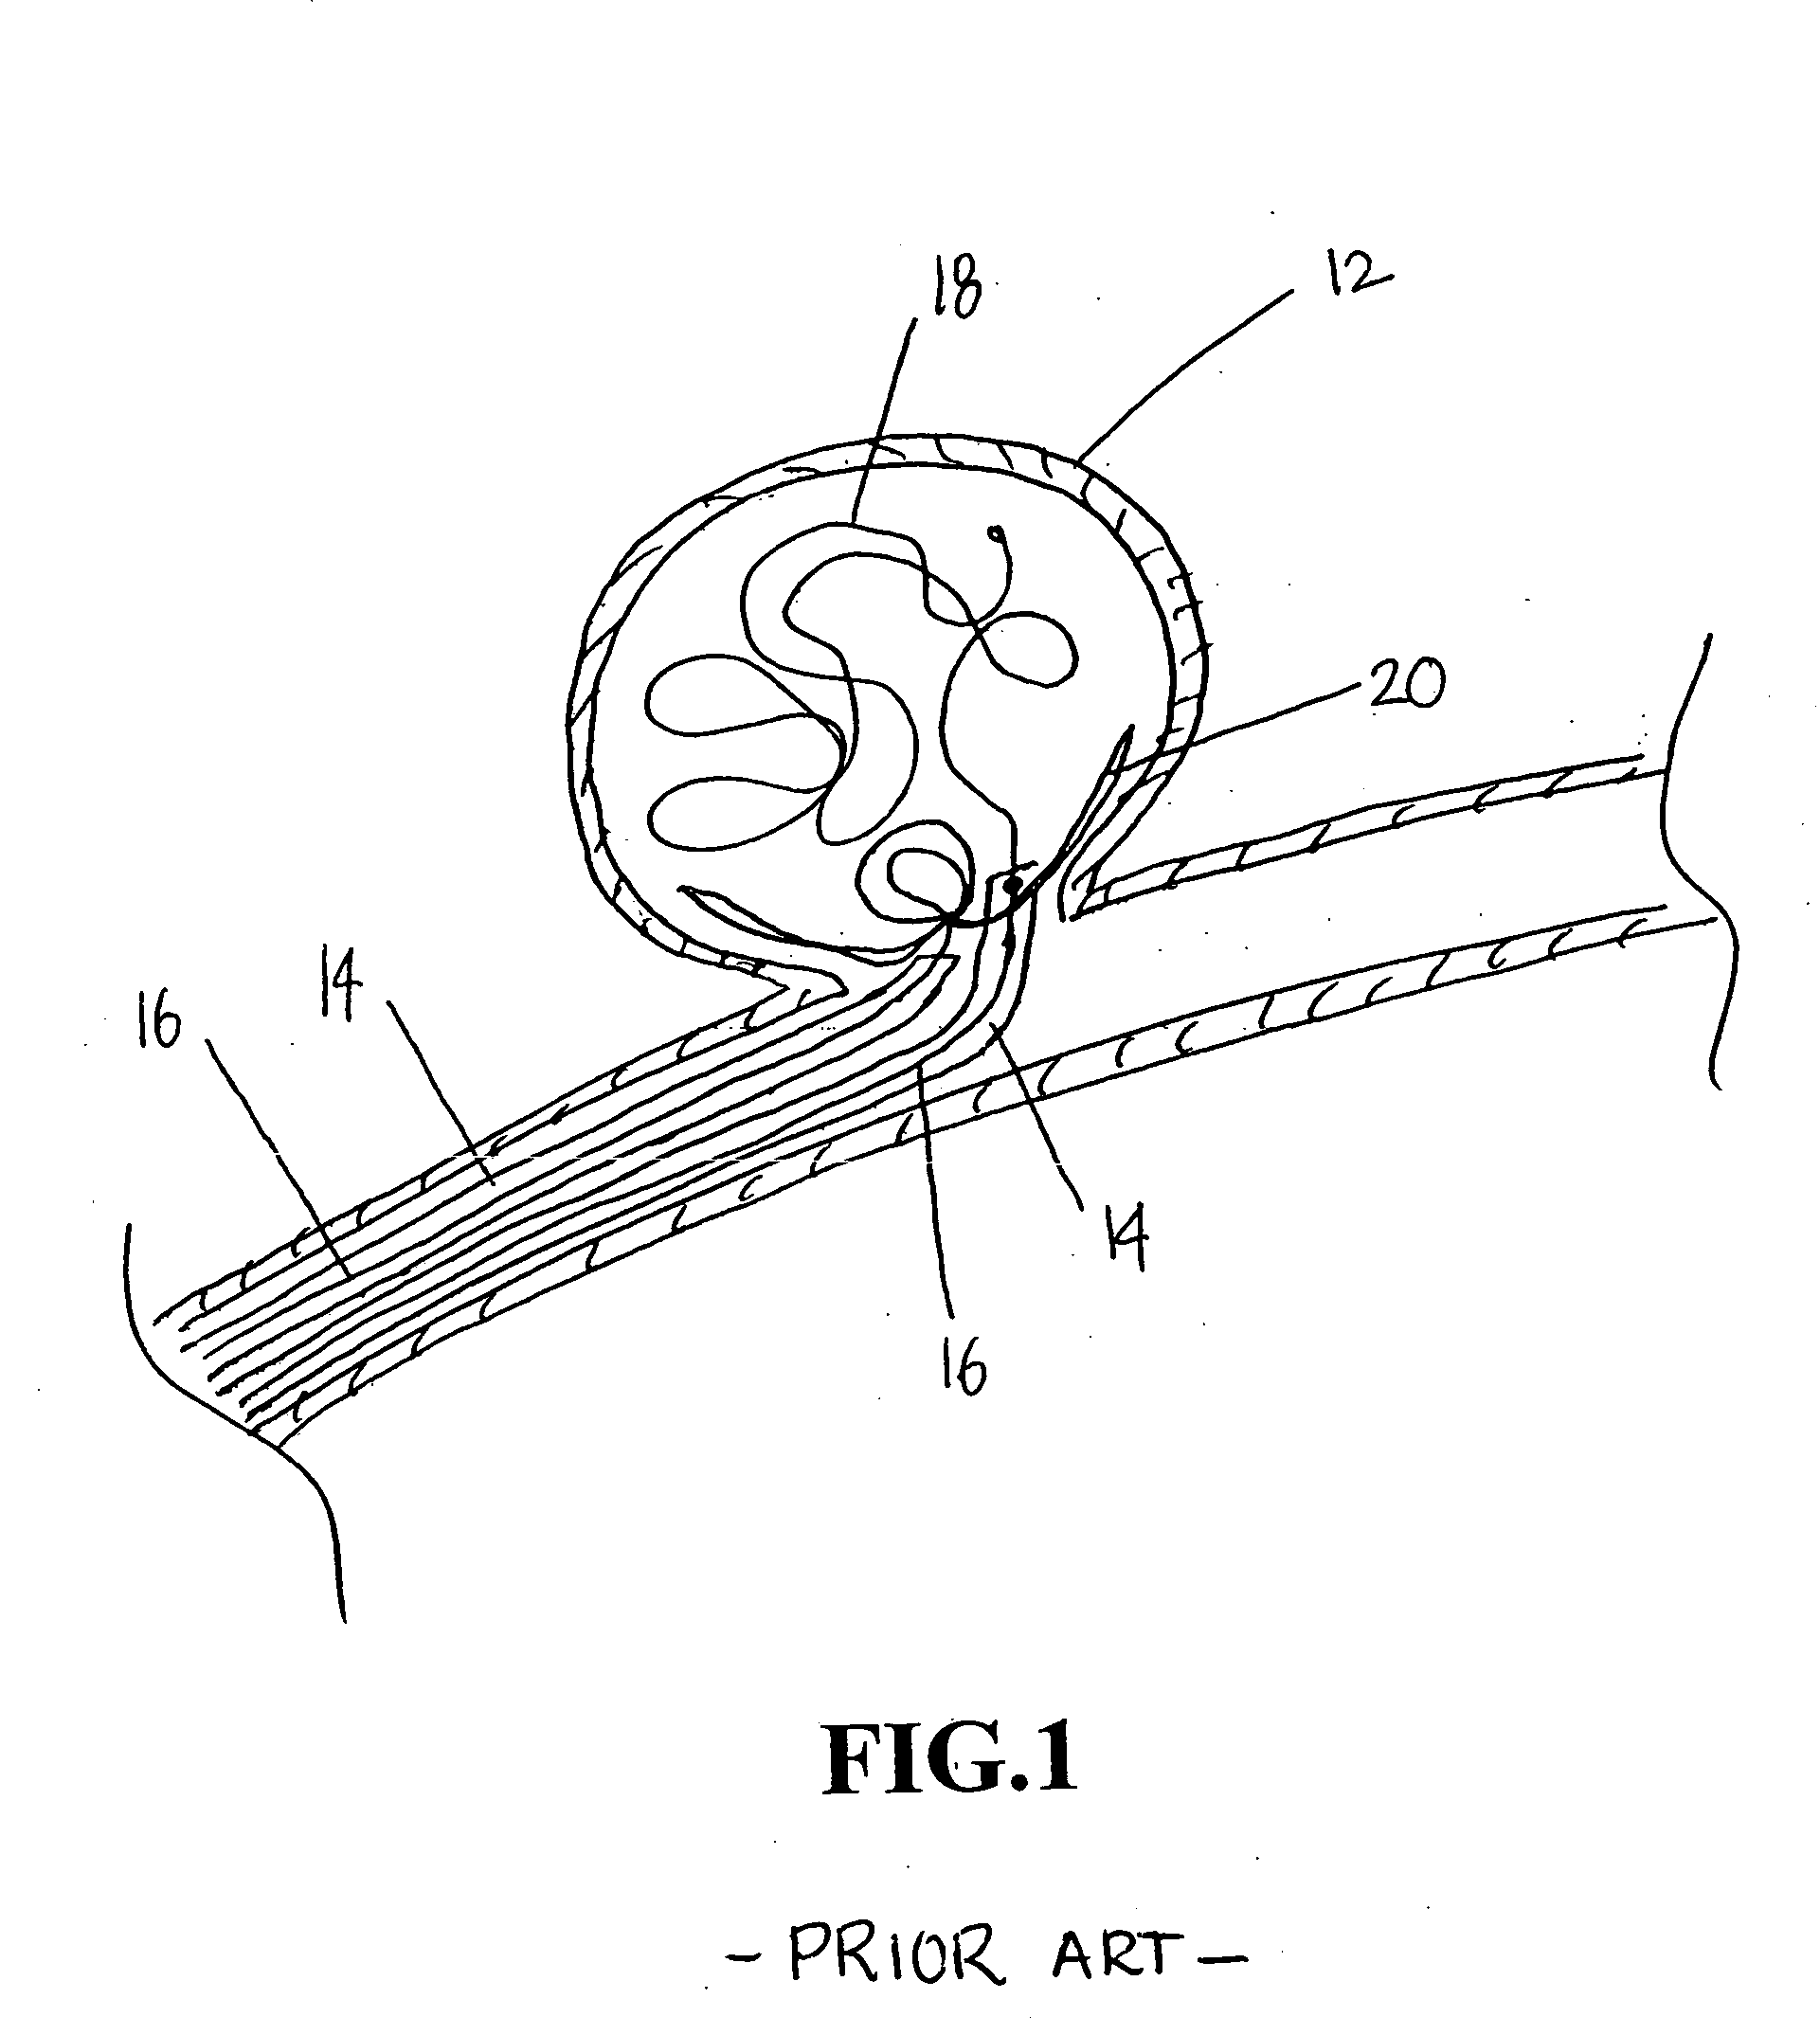 Methods and devices for endothelial denudation to prevent recanalization after embolization